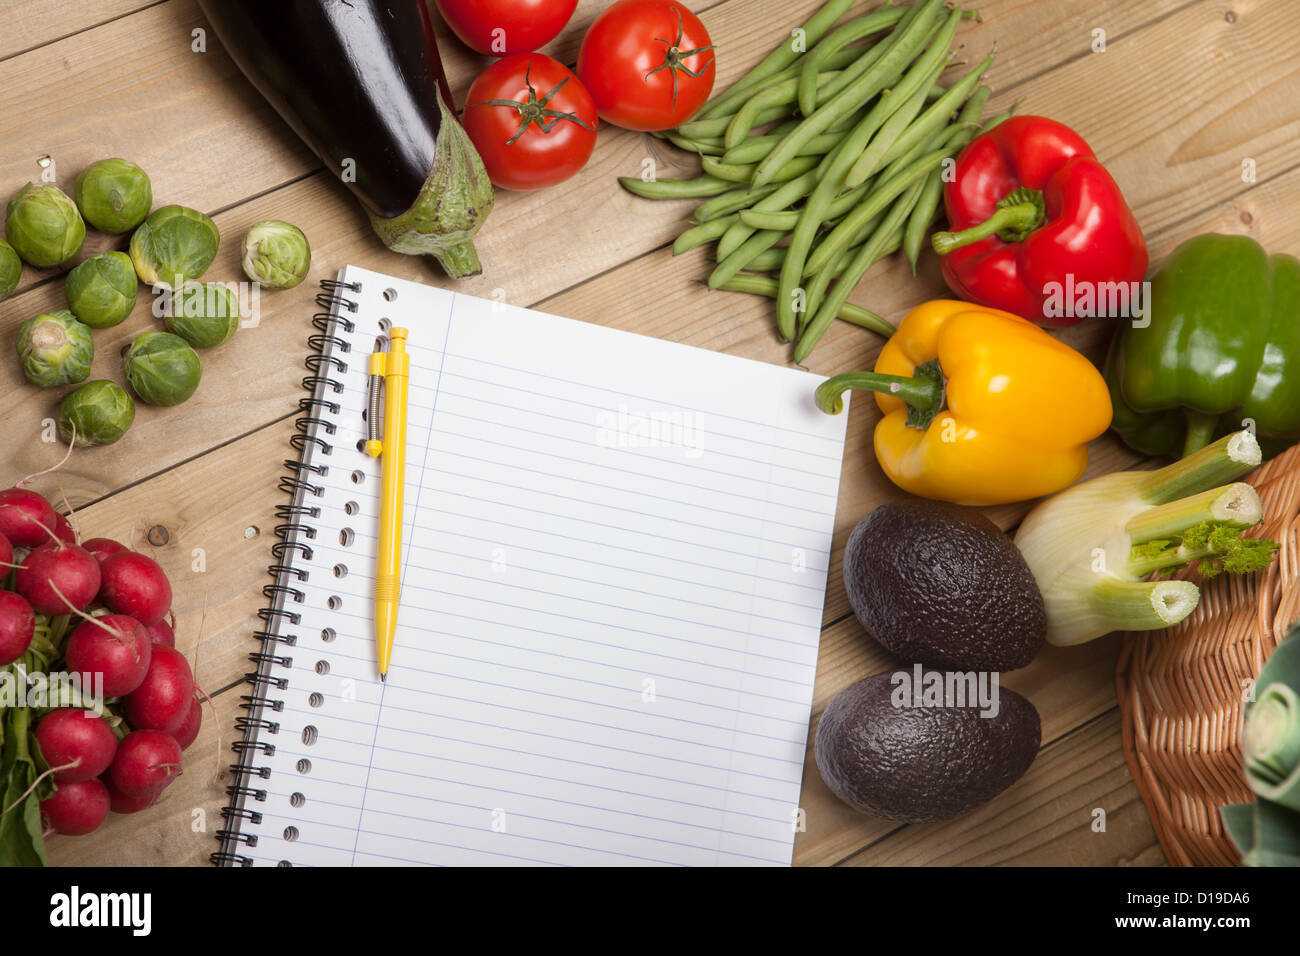 Vegetables with book and pen on wooden surface Stock Photo